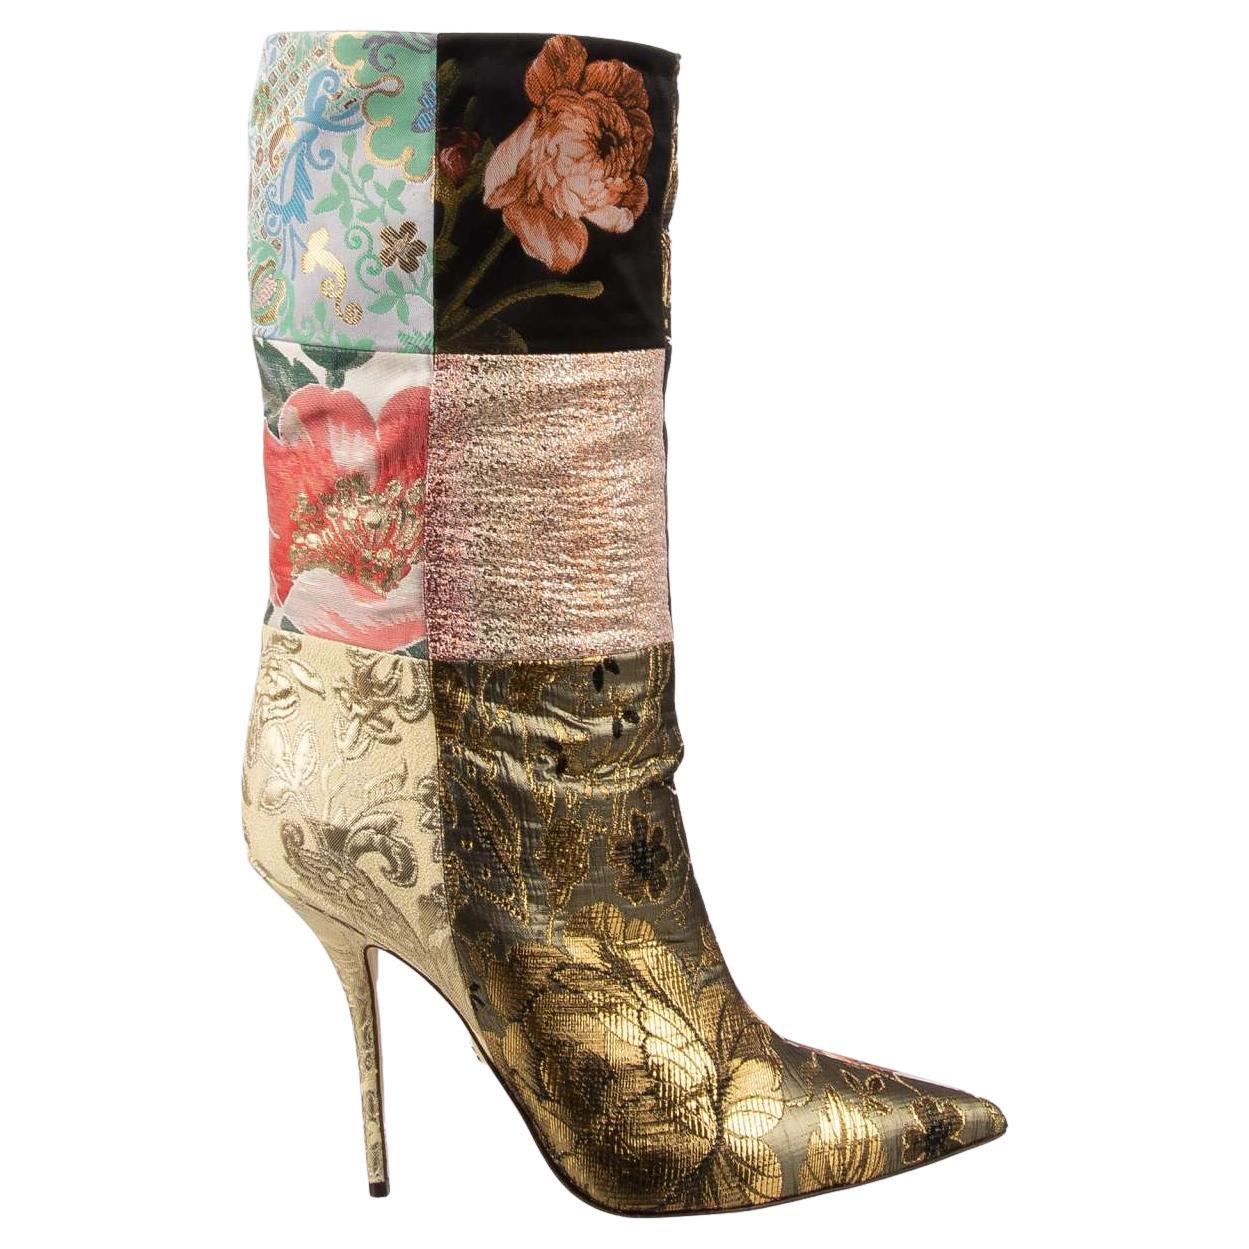 Dolce & Gabbana Flower Brocade Patchwork Boots CARDINALE Gold Pink 40.5 10.5 For Sale